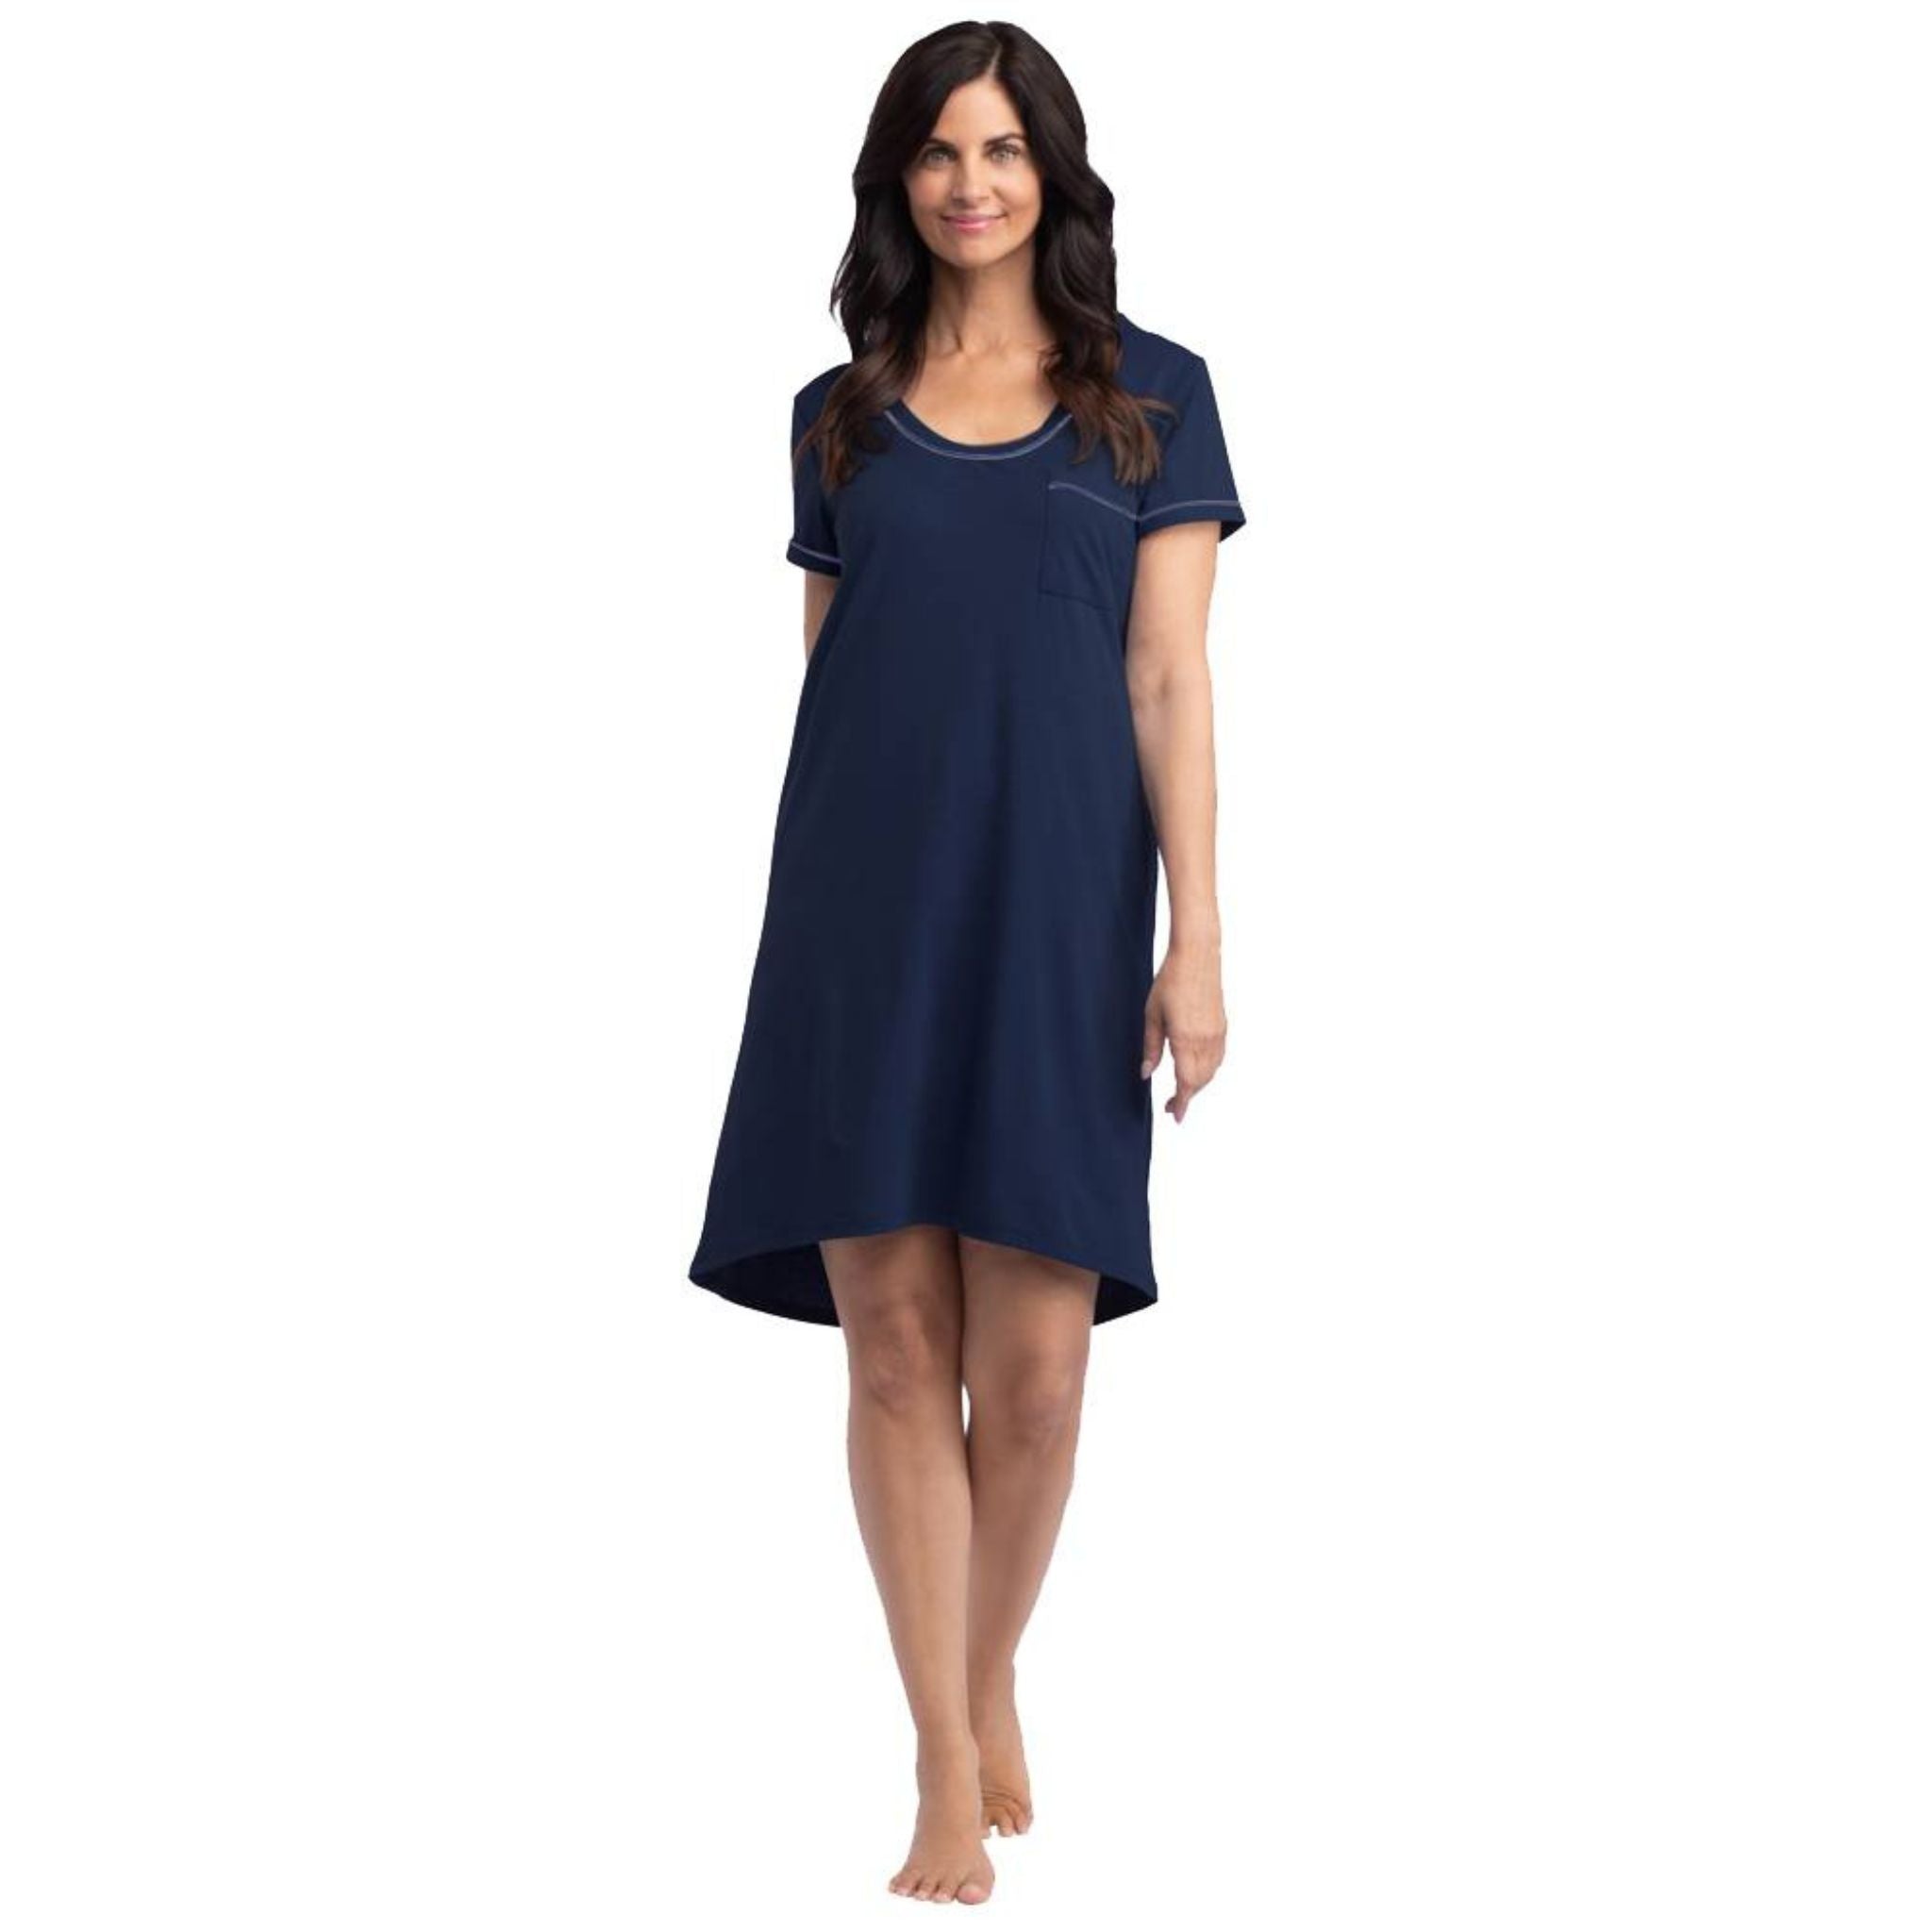 Softies 36” Cali Sleep Shirt with Colored Trim is cozy beyond belief! You’ll fall in love night after night with its elegantly crafted style, including the oh-so-sweet contrast piping on the scoop neckline and short sleeves. It's just-above-the-knee hemline creates a special sway and flow you can't get from an ordinary nightgown. 